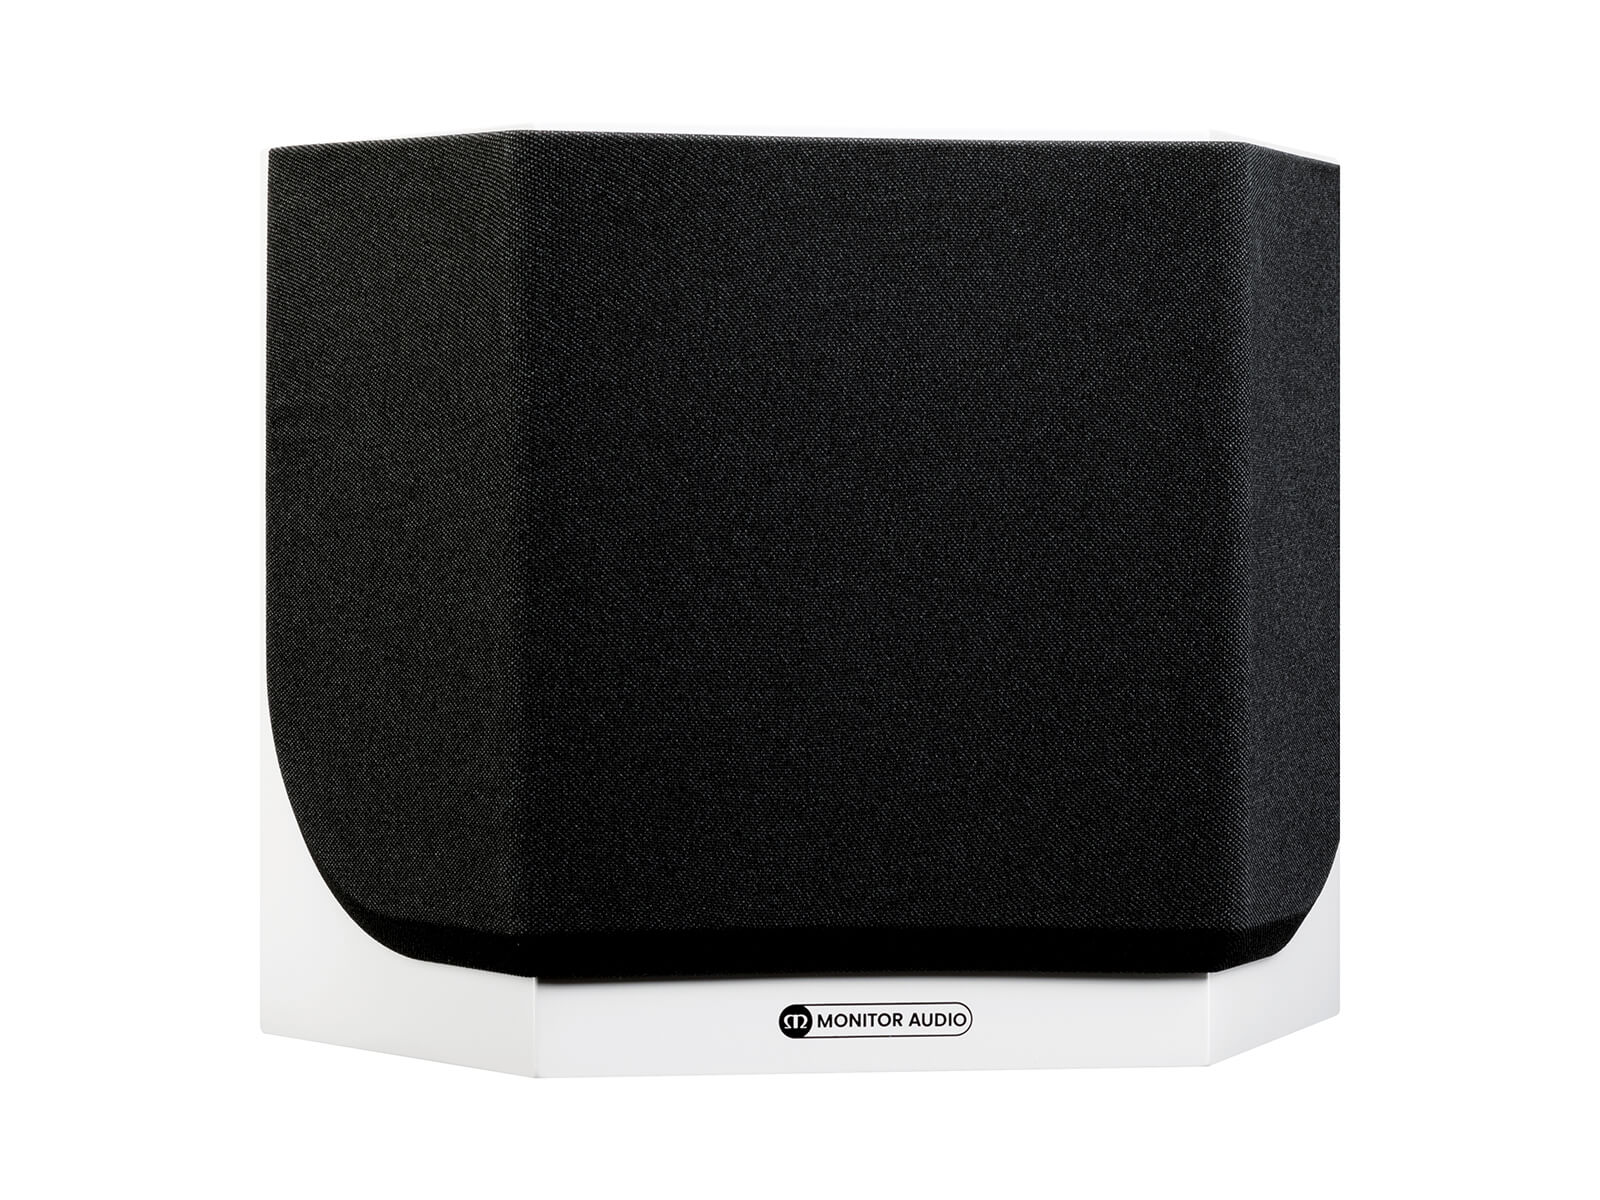 Monitor Audio's Silver FX 7G, in a satin white finish, iso view, with grille.